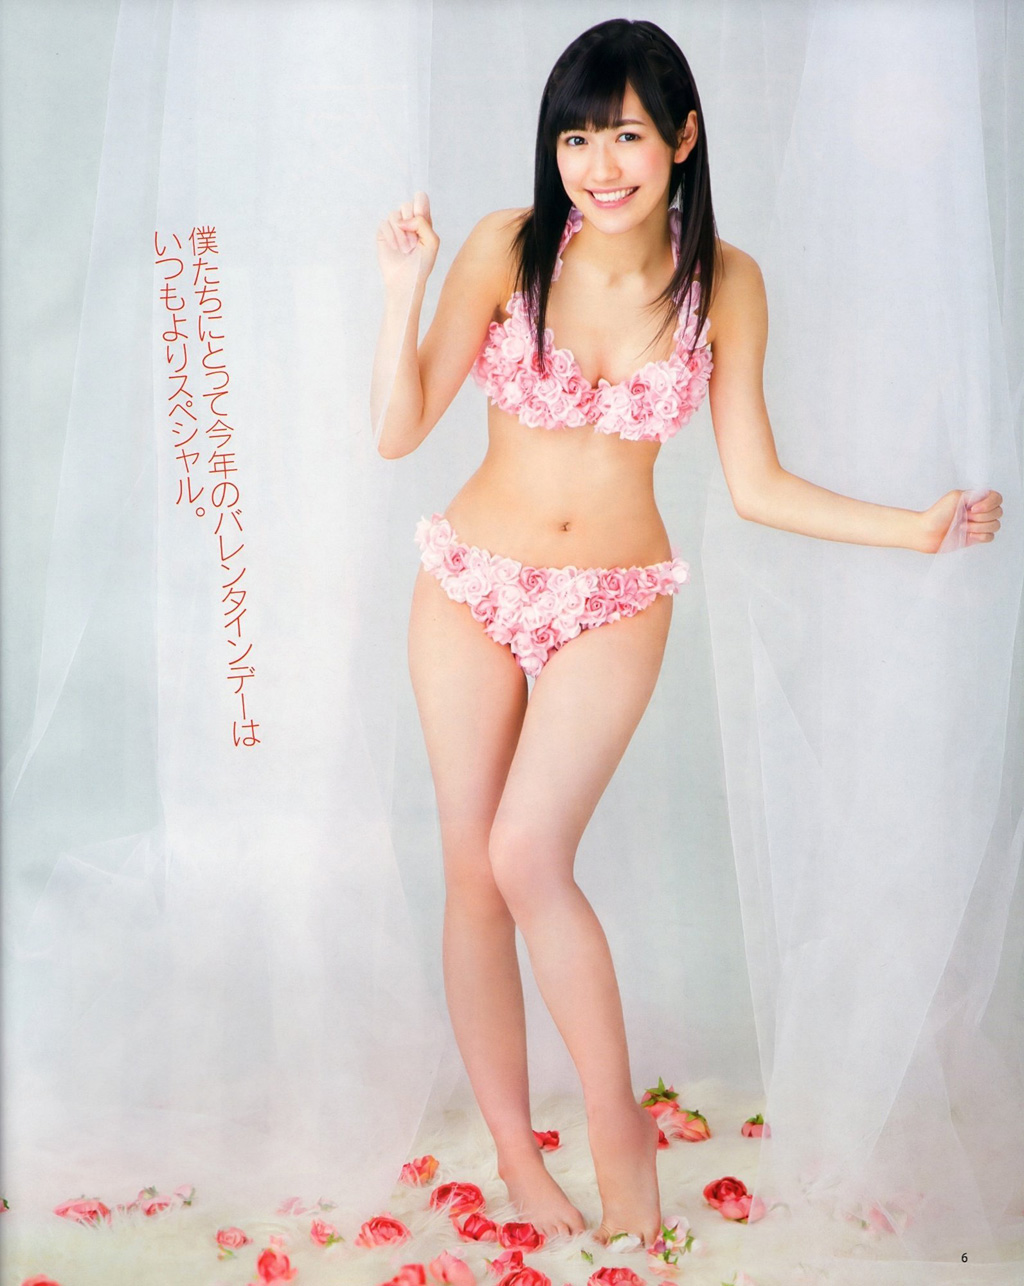 Cant-get-enough-of-Mayu-Watanabe-渡辺-麻友-8